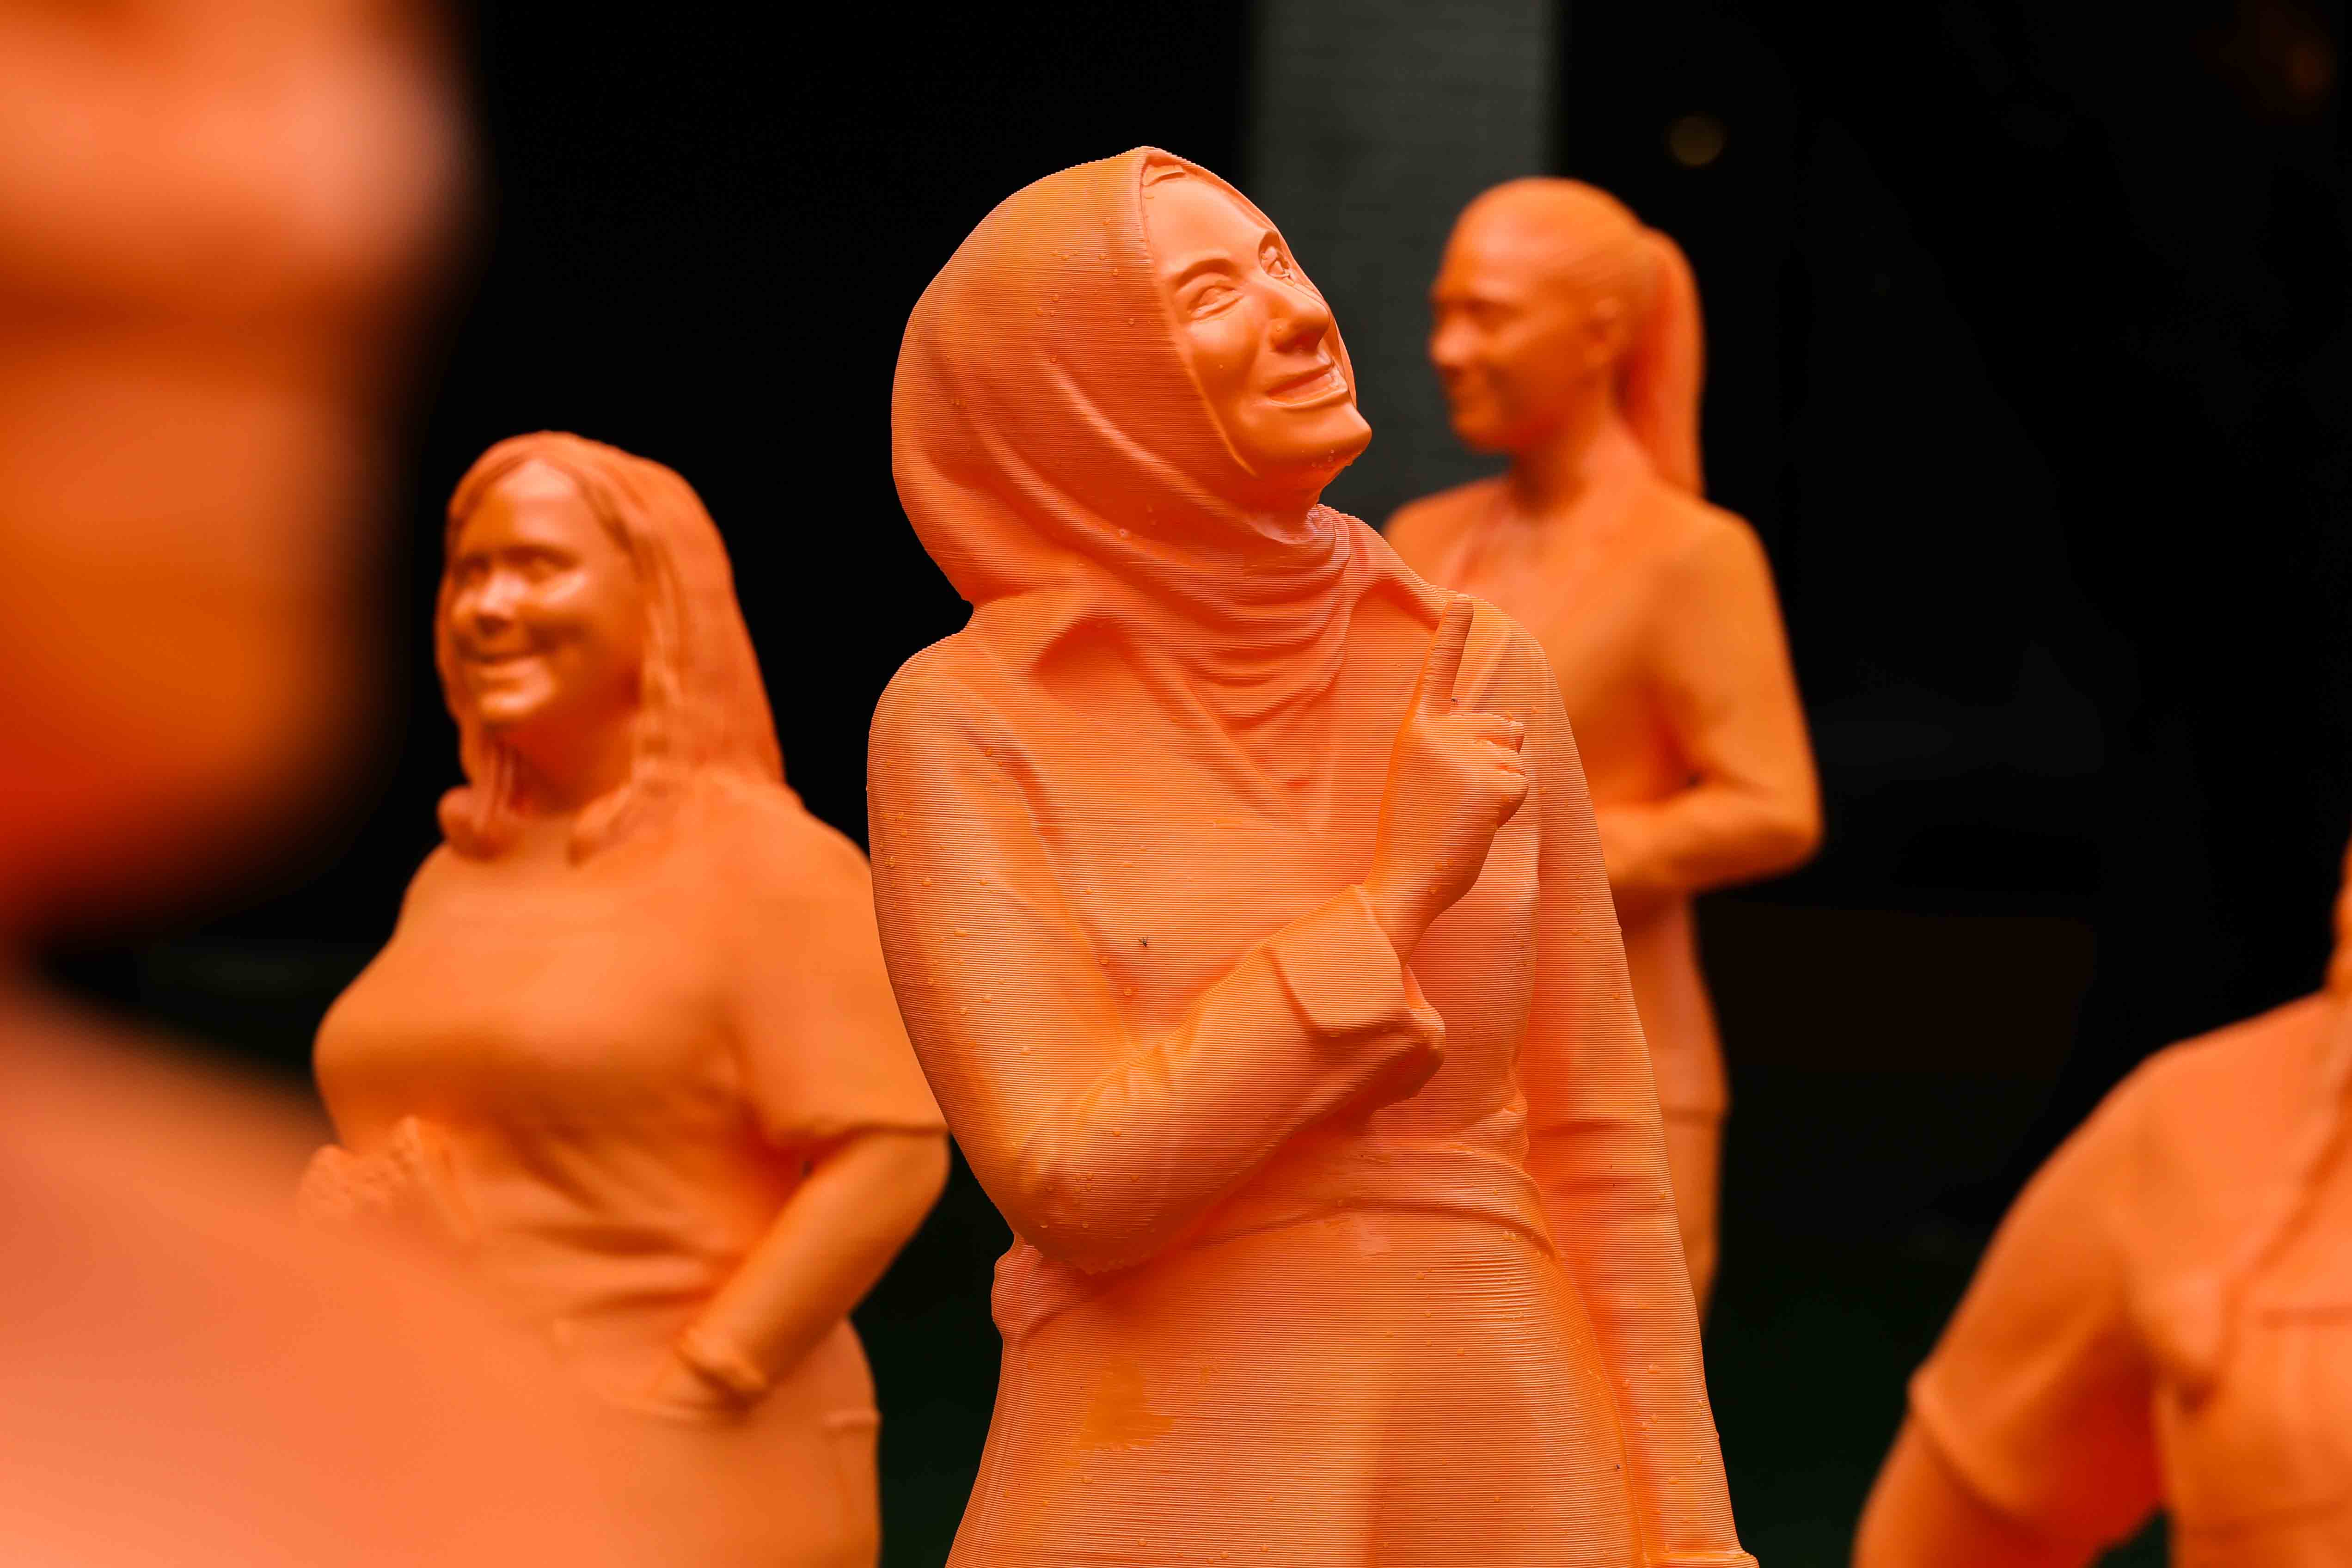 IfThenSheCan: Ten Statues From All-Female Exhibit Are on Display